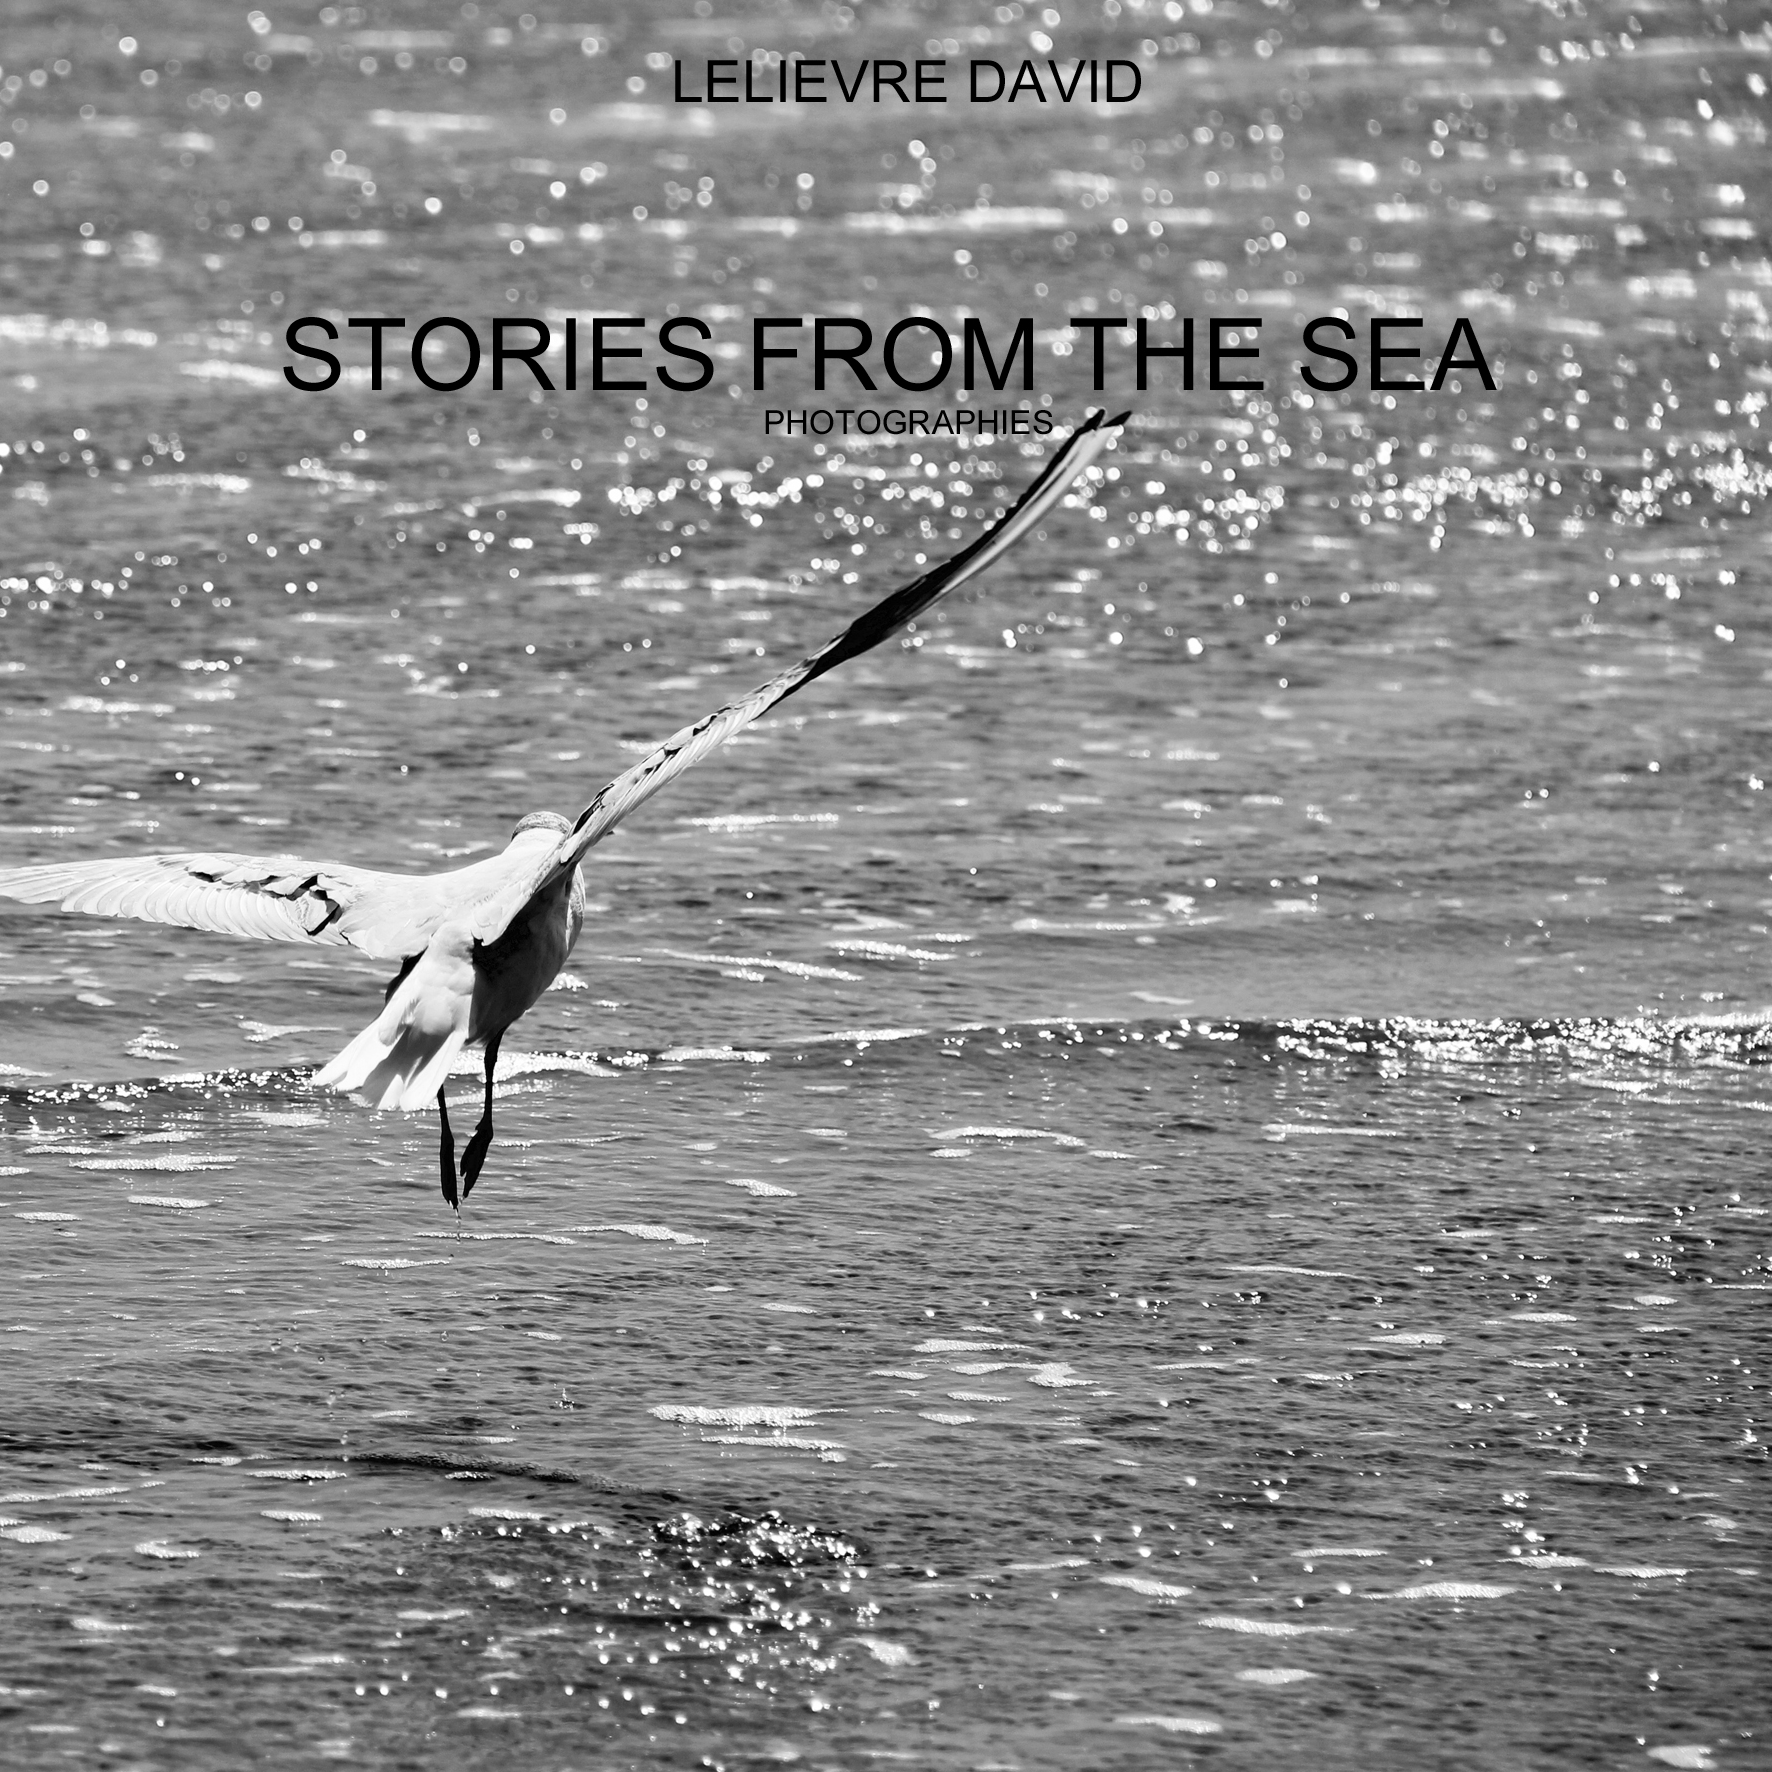 Stories from the sea